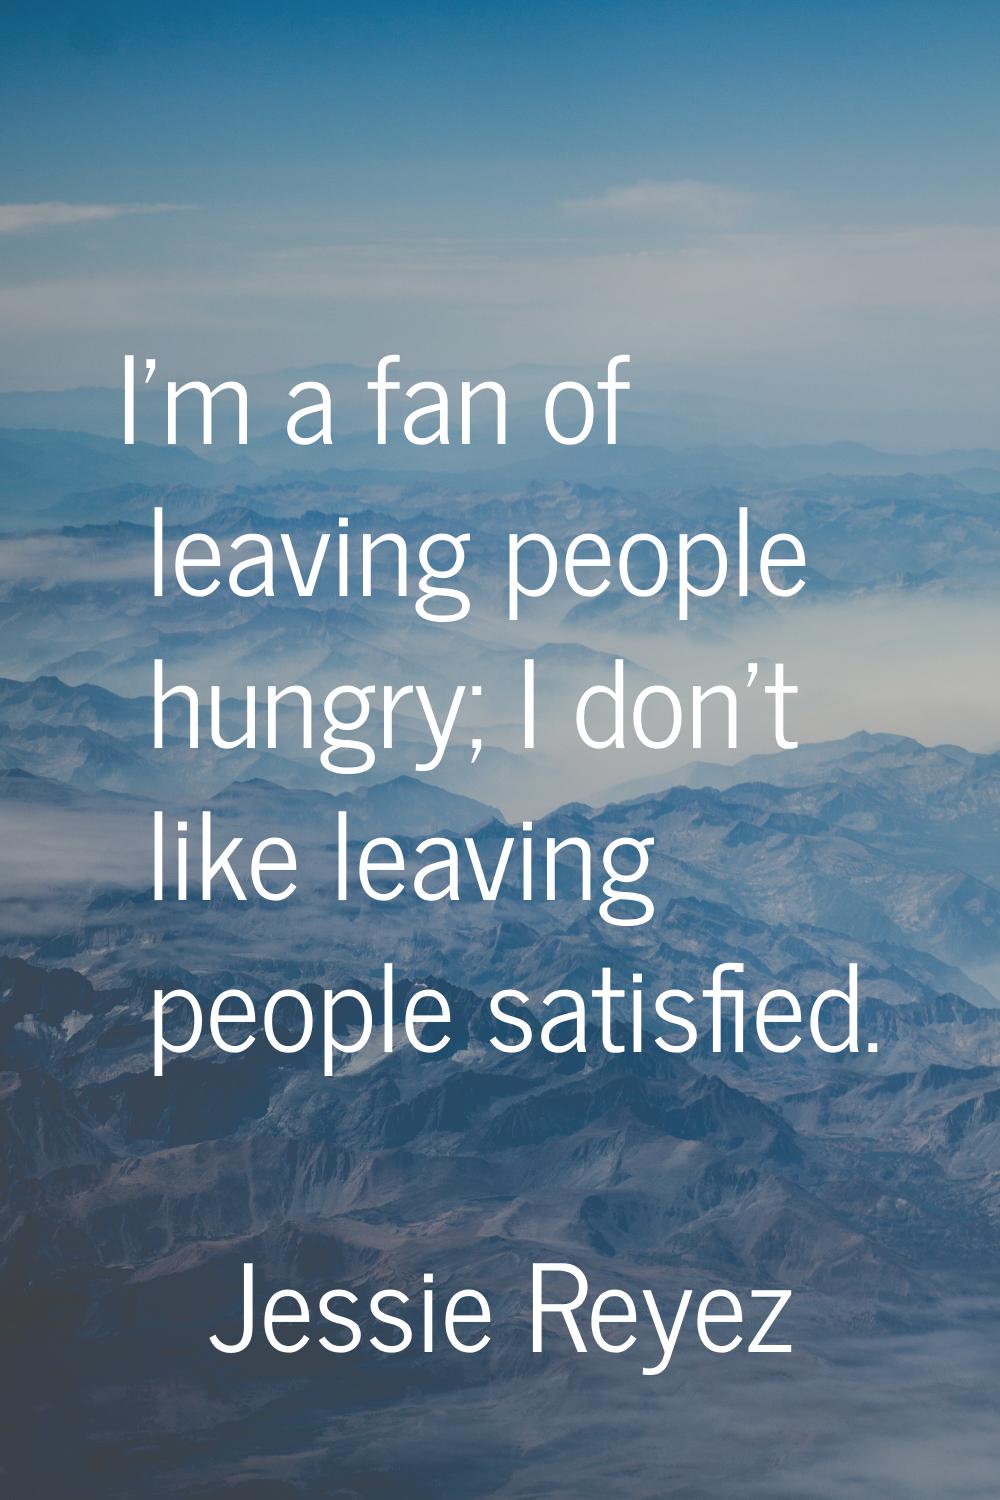 I'm a fan of leaving people hungry; I don't like leaving people satisfied.